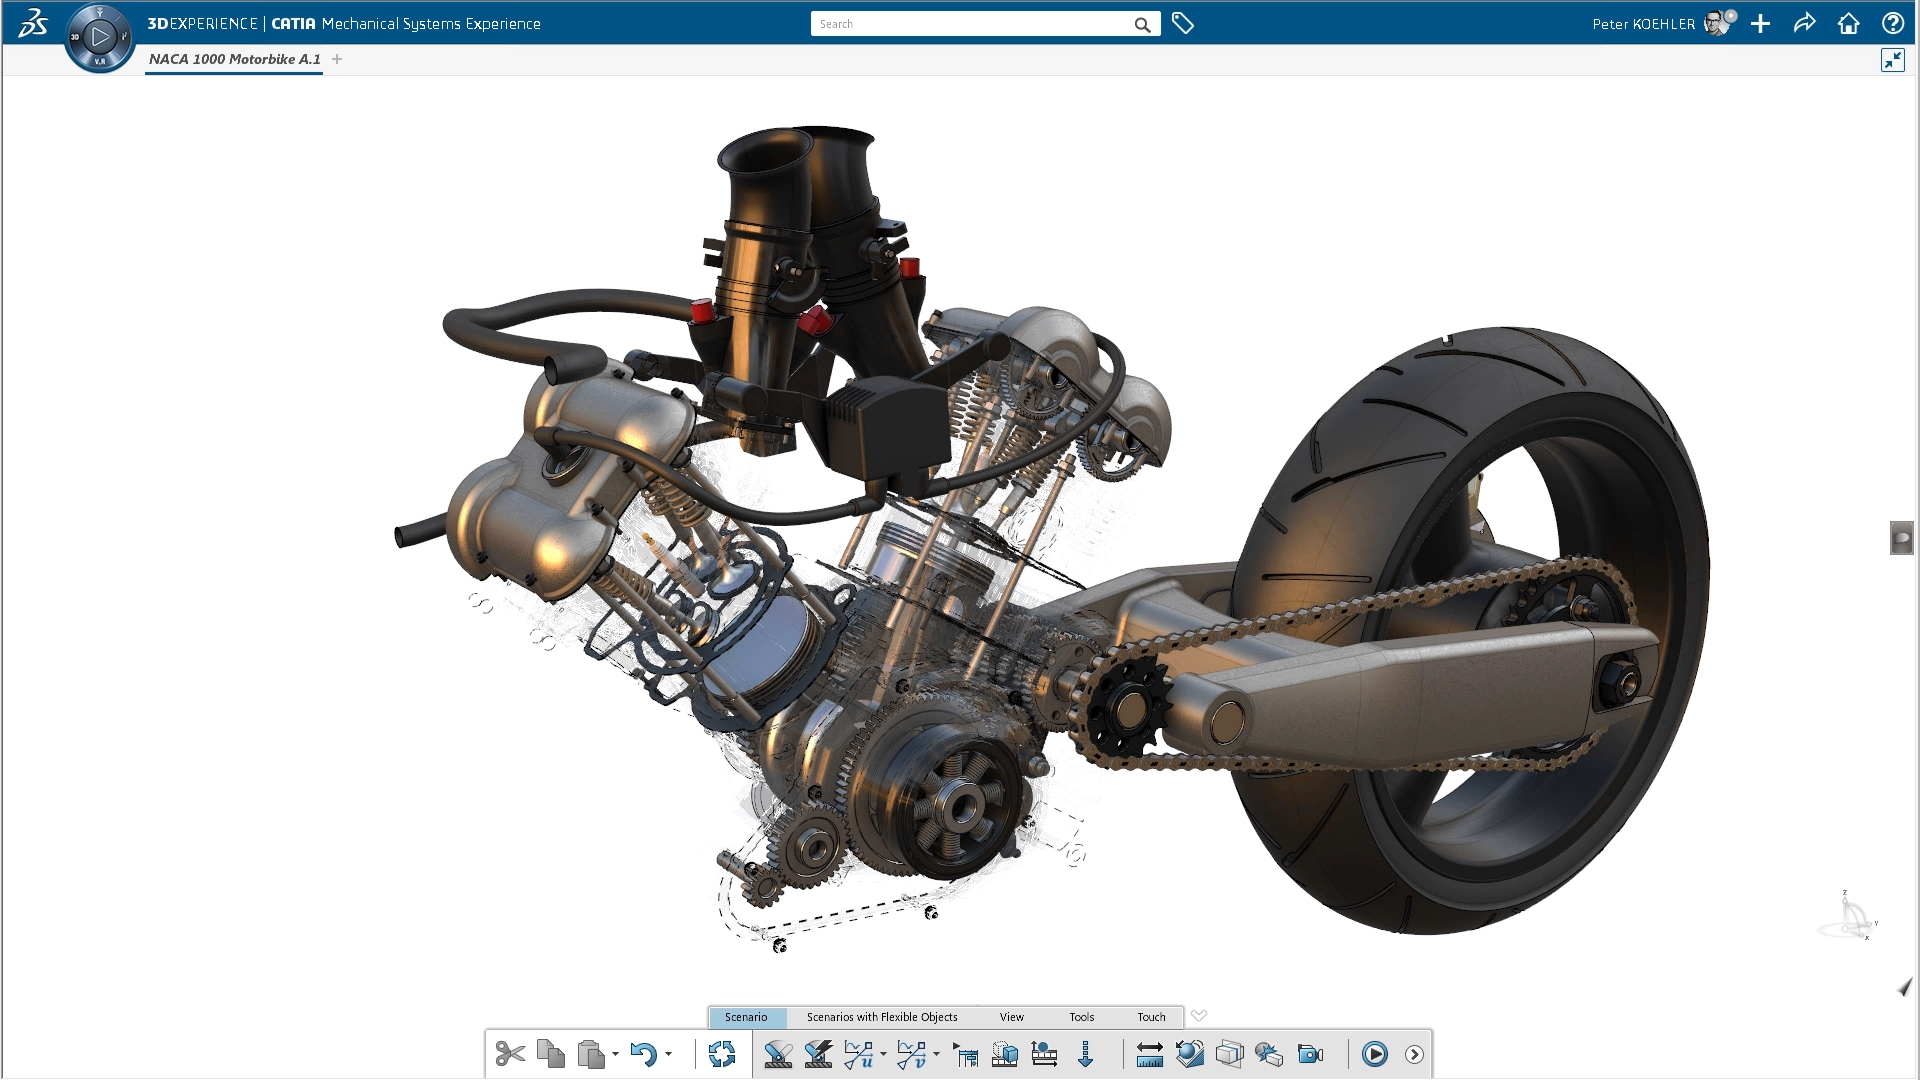 An exploded view of an Ducati motorcylce engine can be appreciated in great detail in the XTAL HMD.